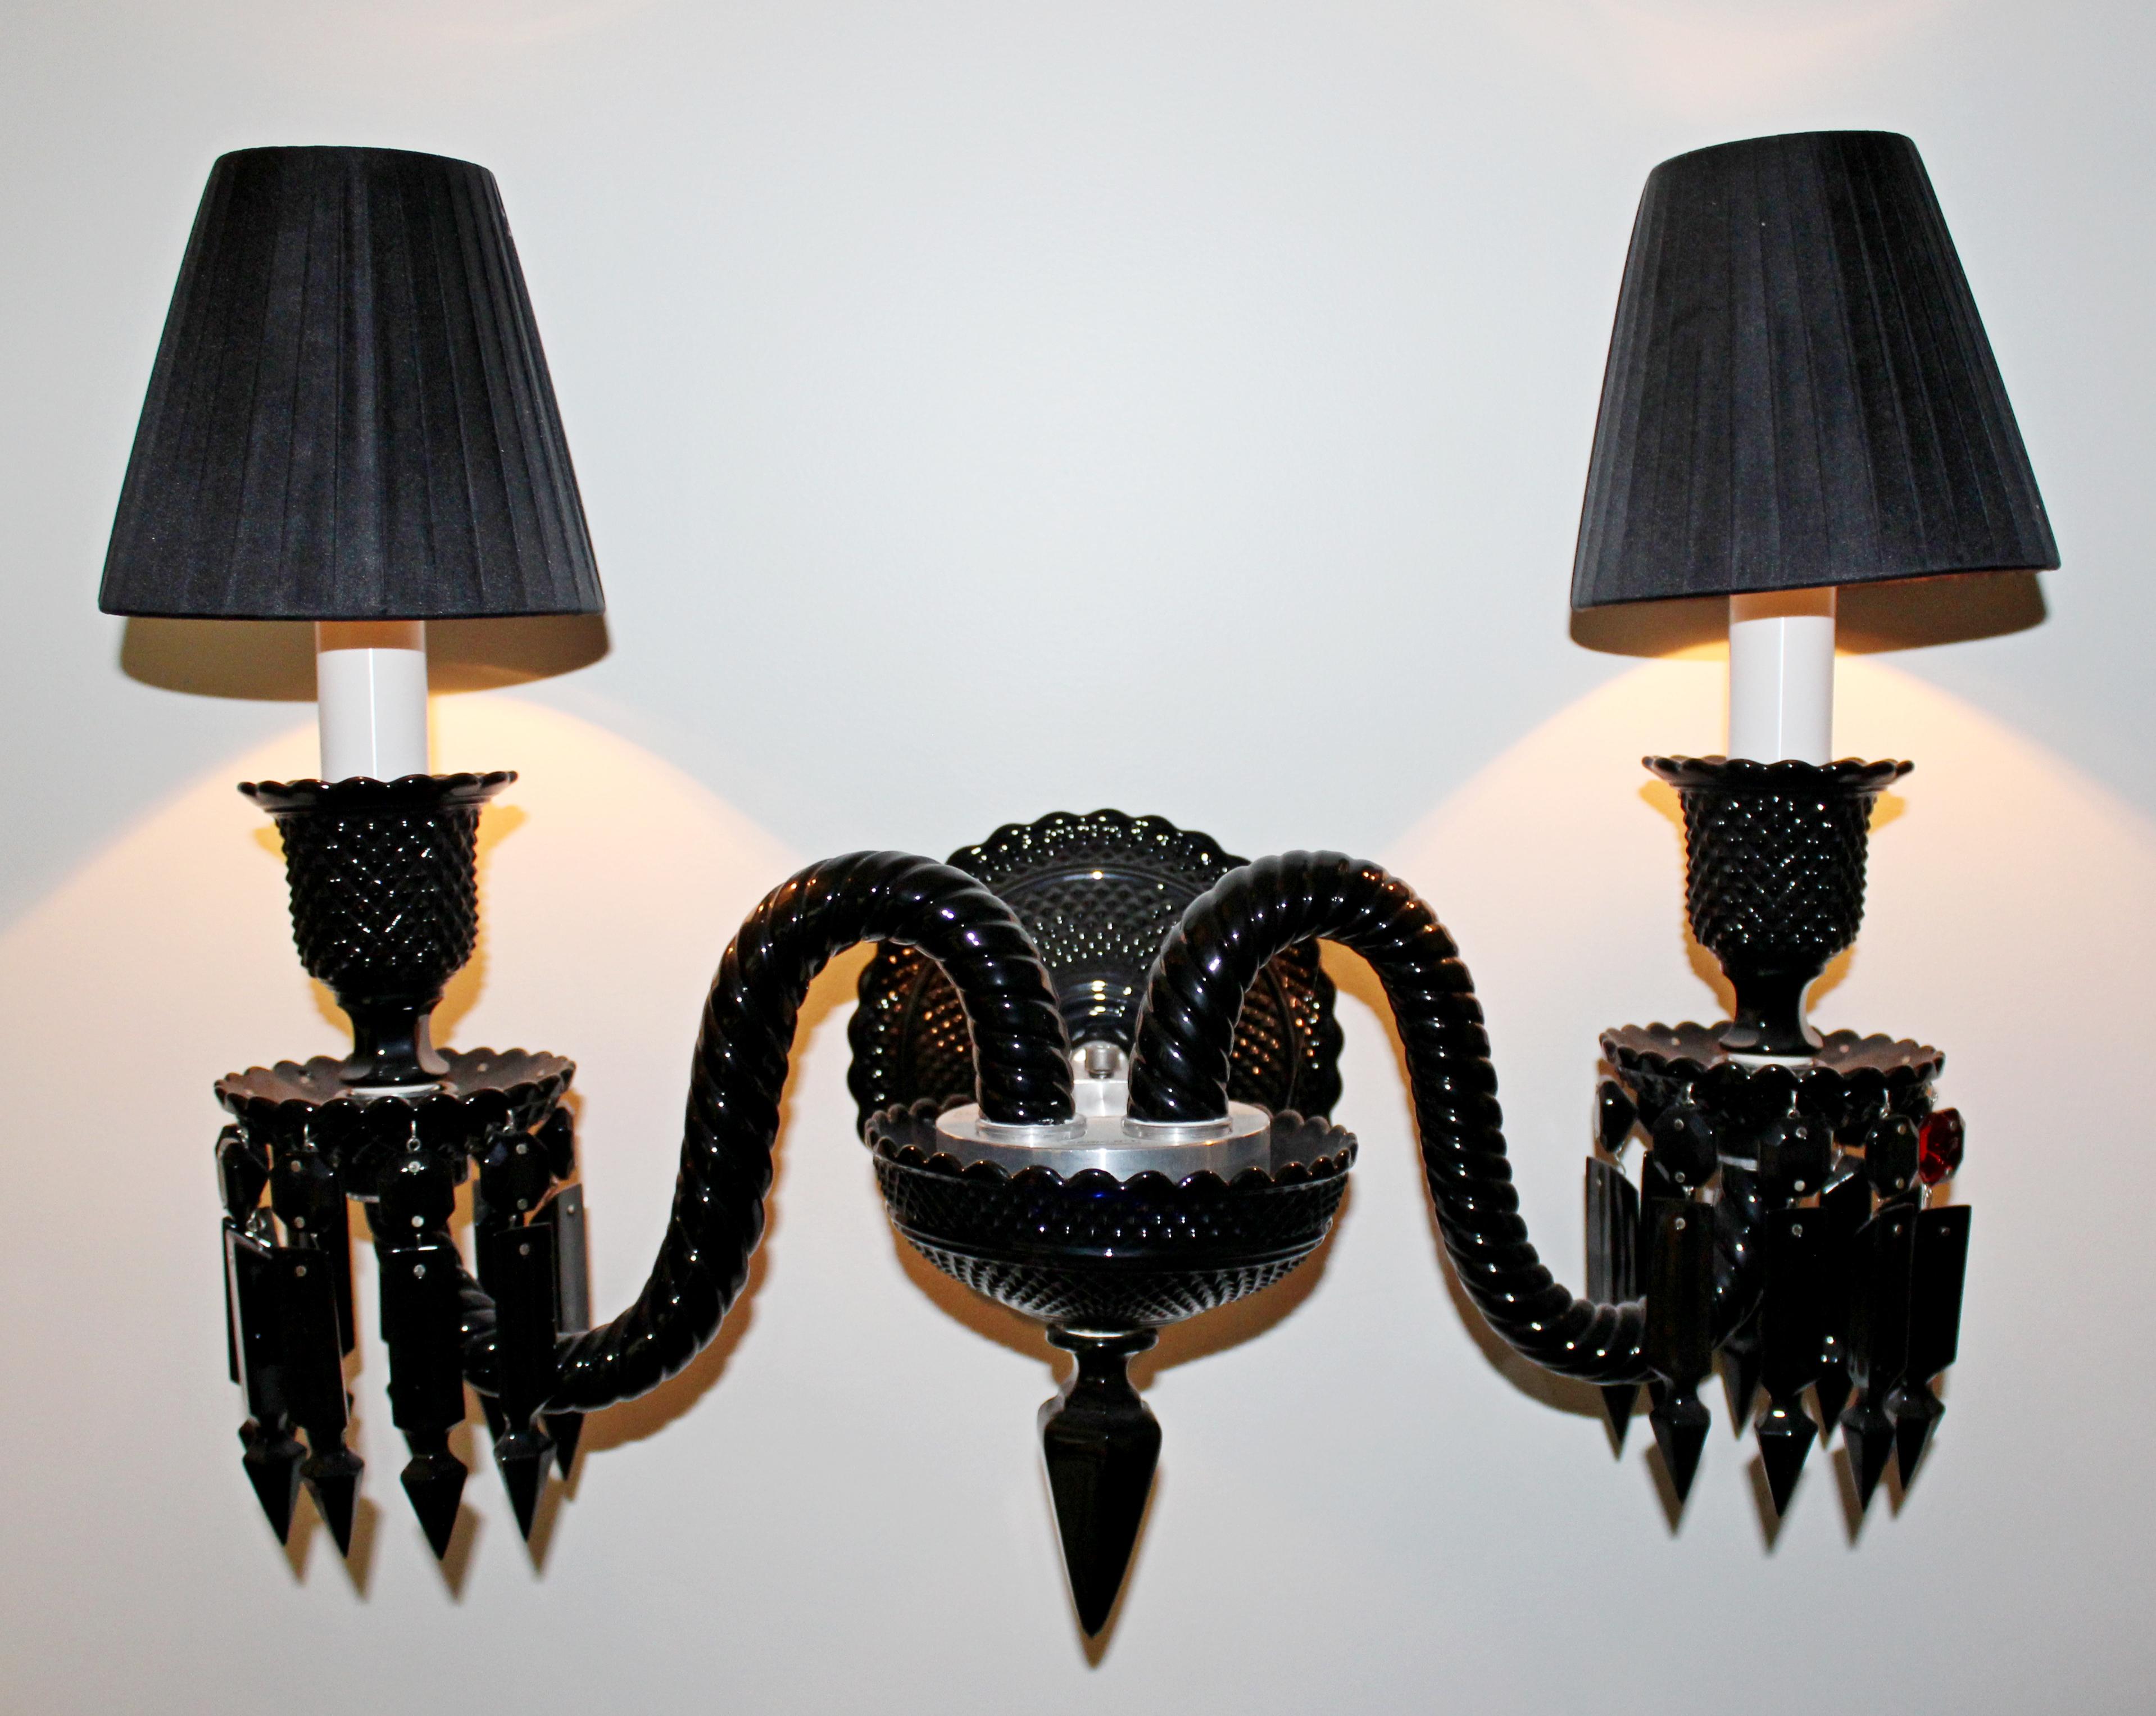 For your consideration is an absolutely stunning, black crystal, Zenith Noir wall sconce light fixture, by Phillipe Starck for Baccarat, signed, circa 2000s. In excellent condition. The dimensions are 20